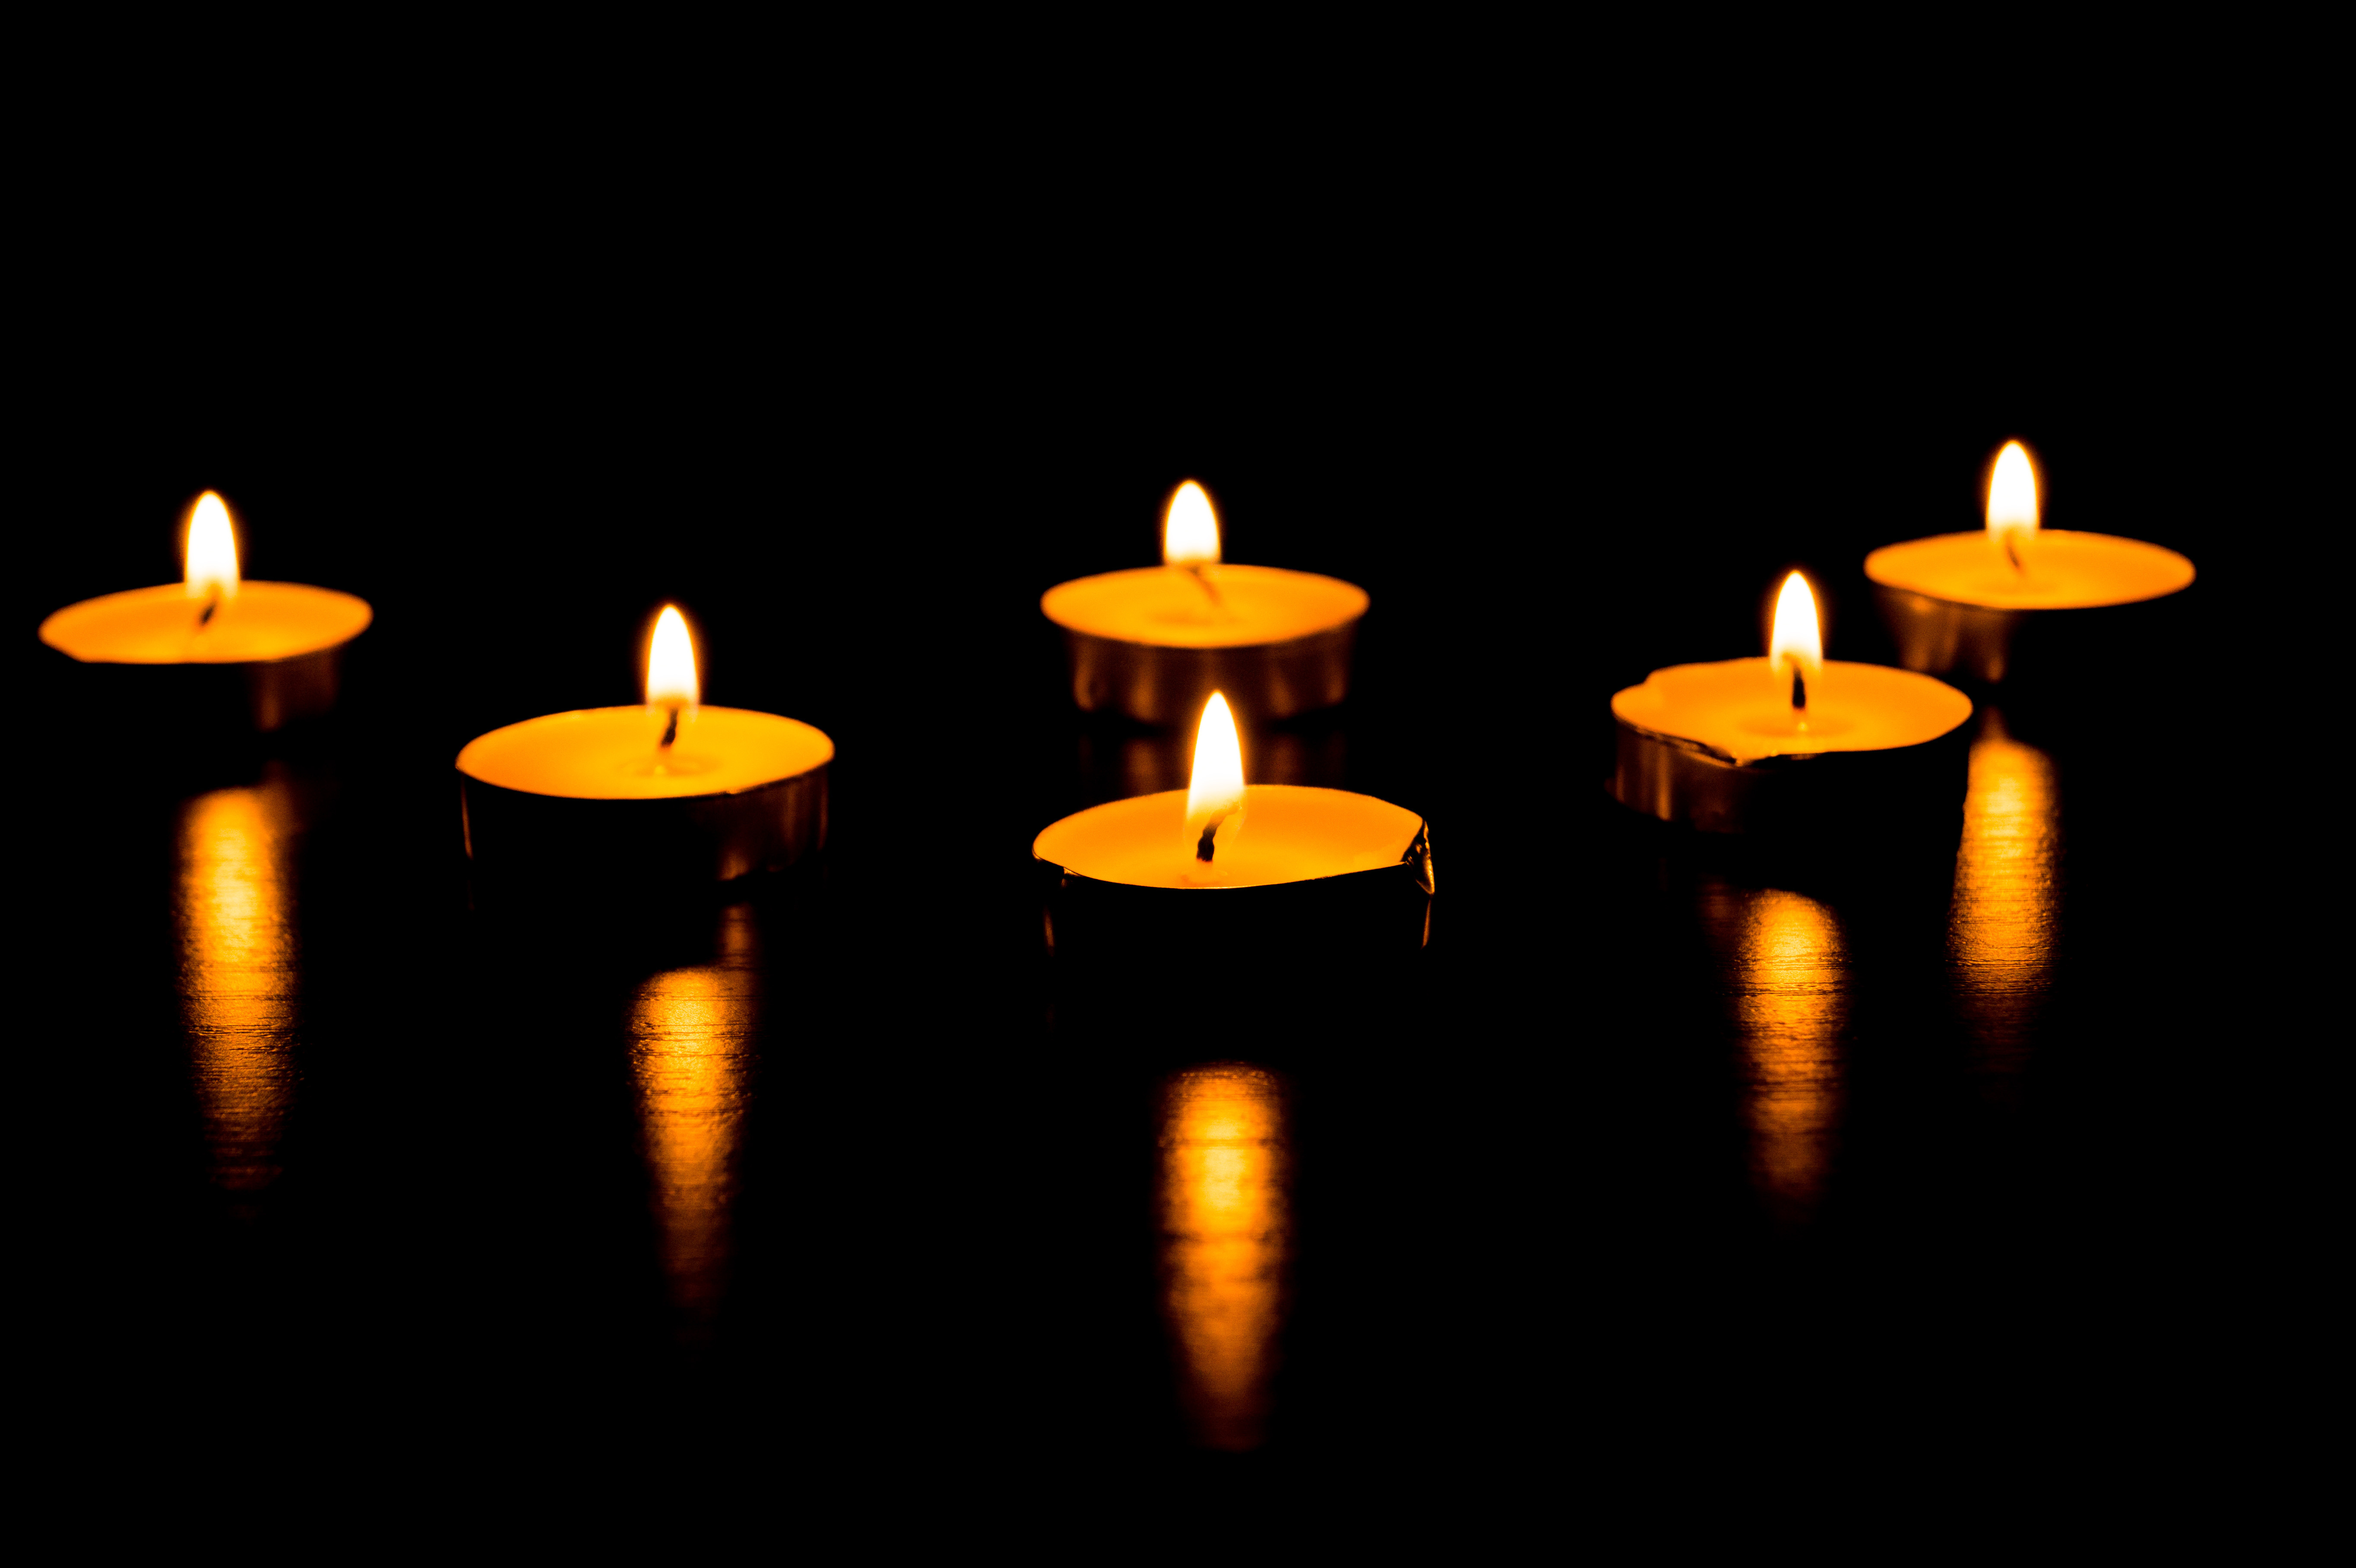 Burning candles - a symbol of International Holocaust Remembrance day 27 January - Image